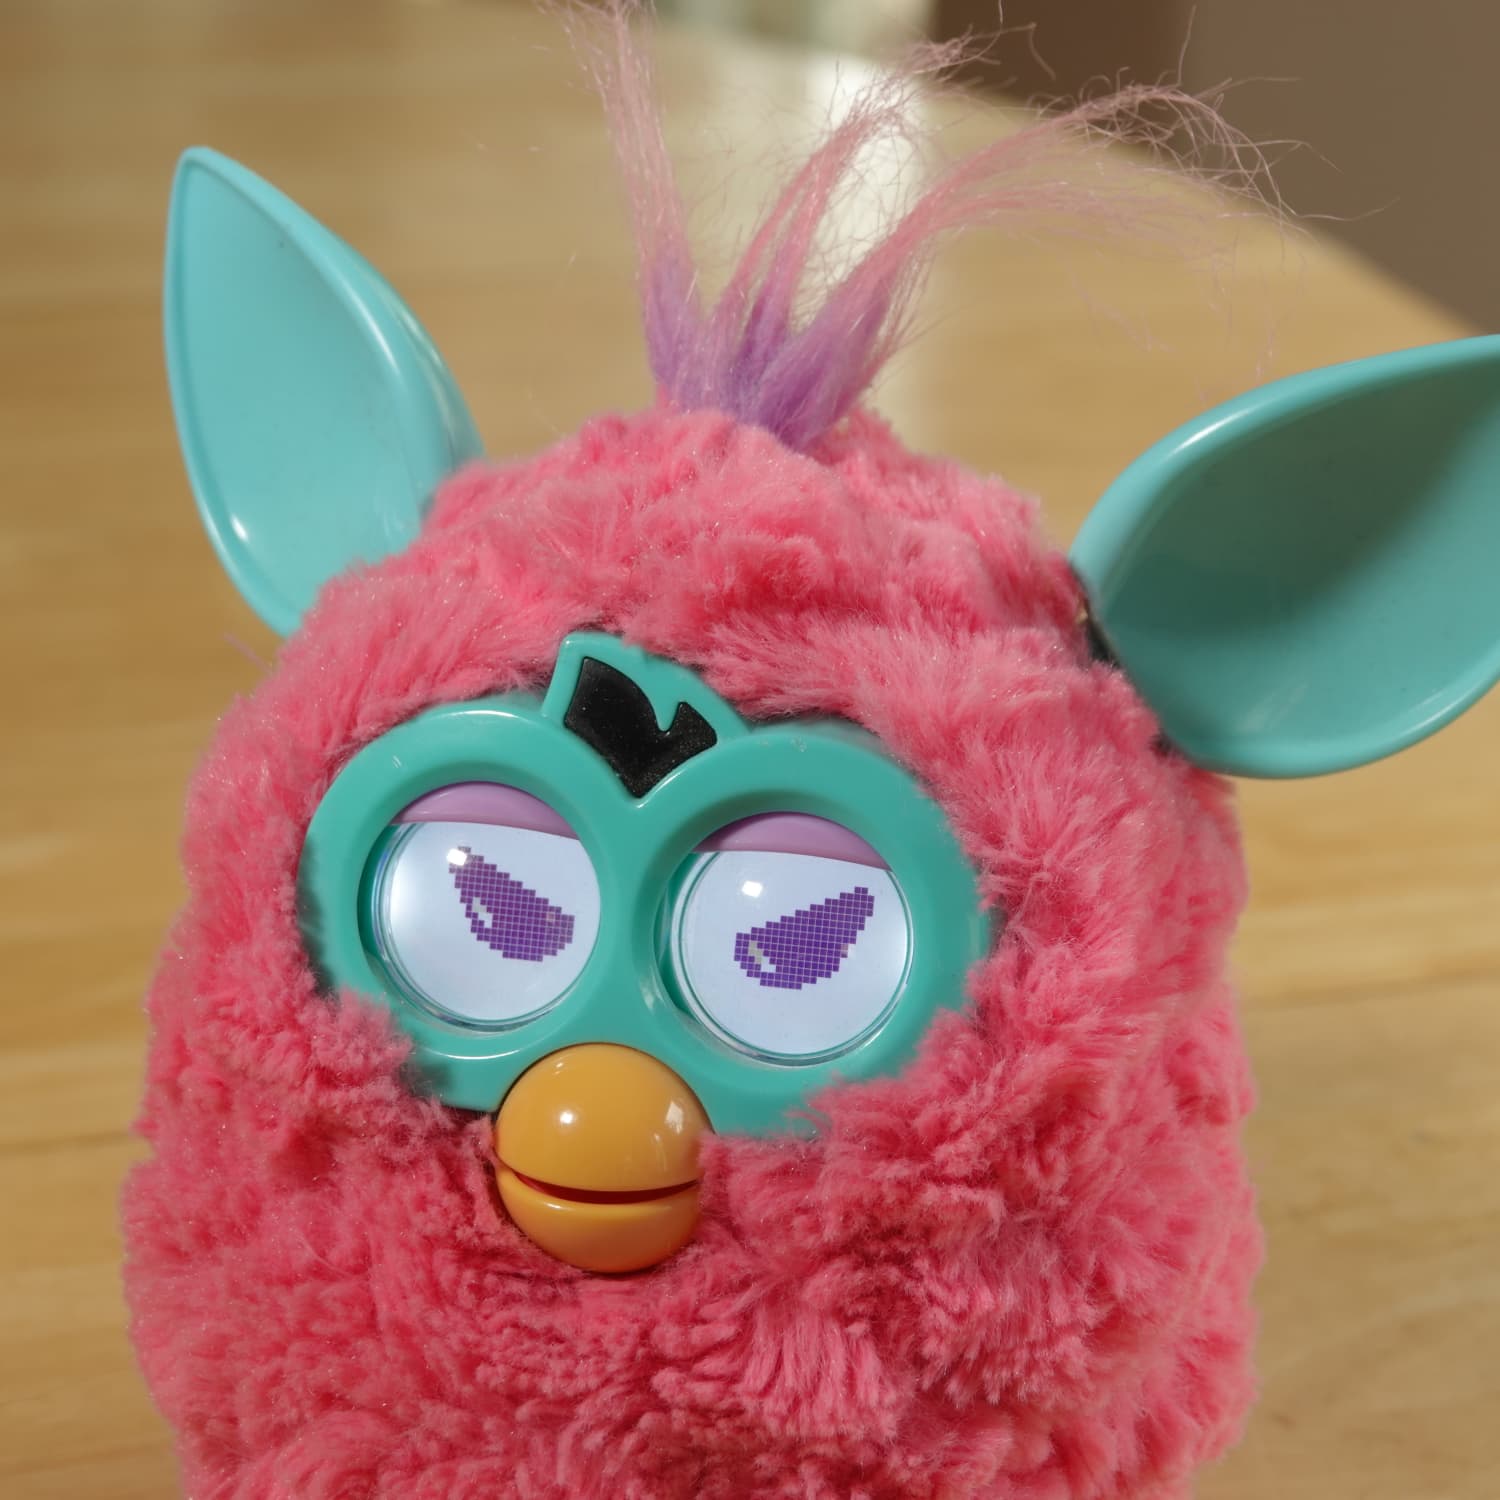 Your Old Furbies Could Be Worth Up to $5,000 on